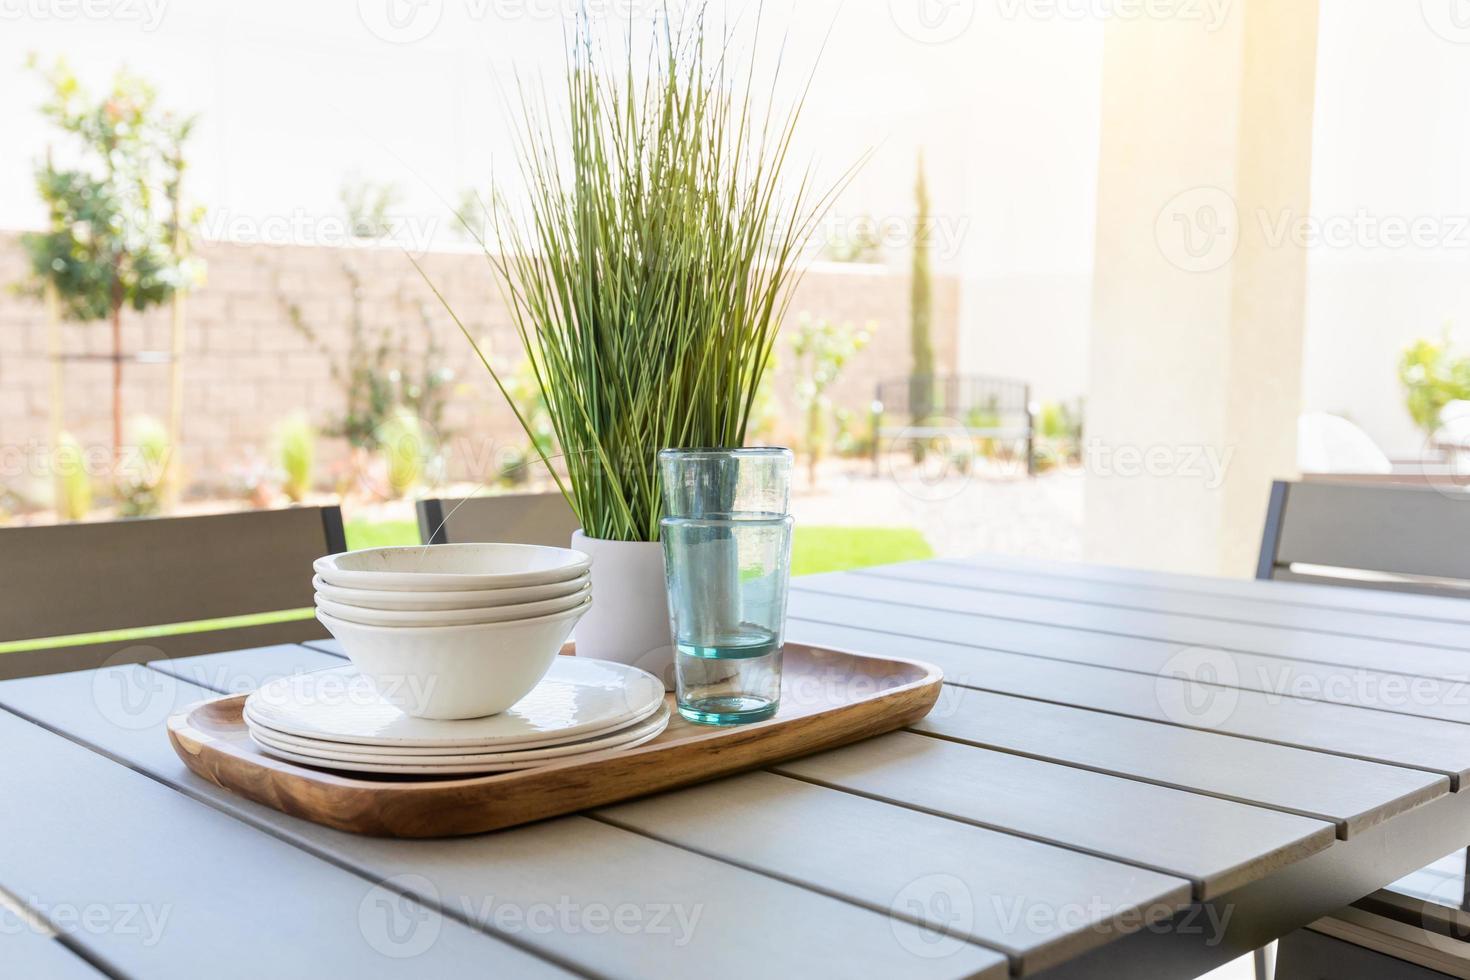 Outdoor Patio Setting with Dishes and Glasses on Tray photo